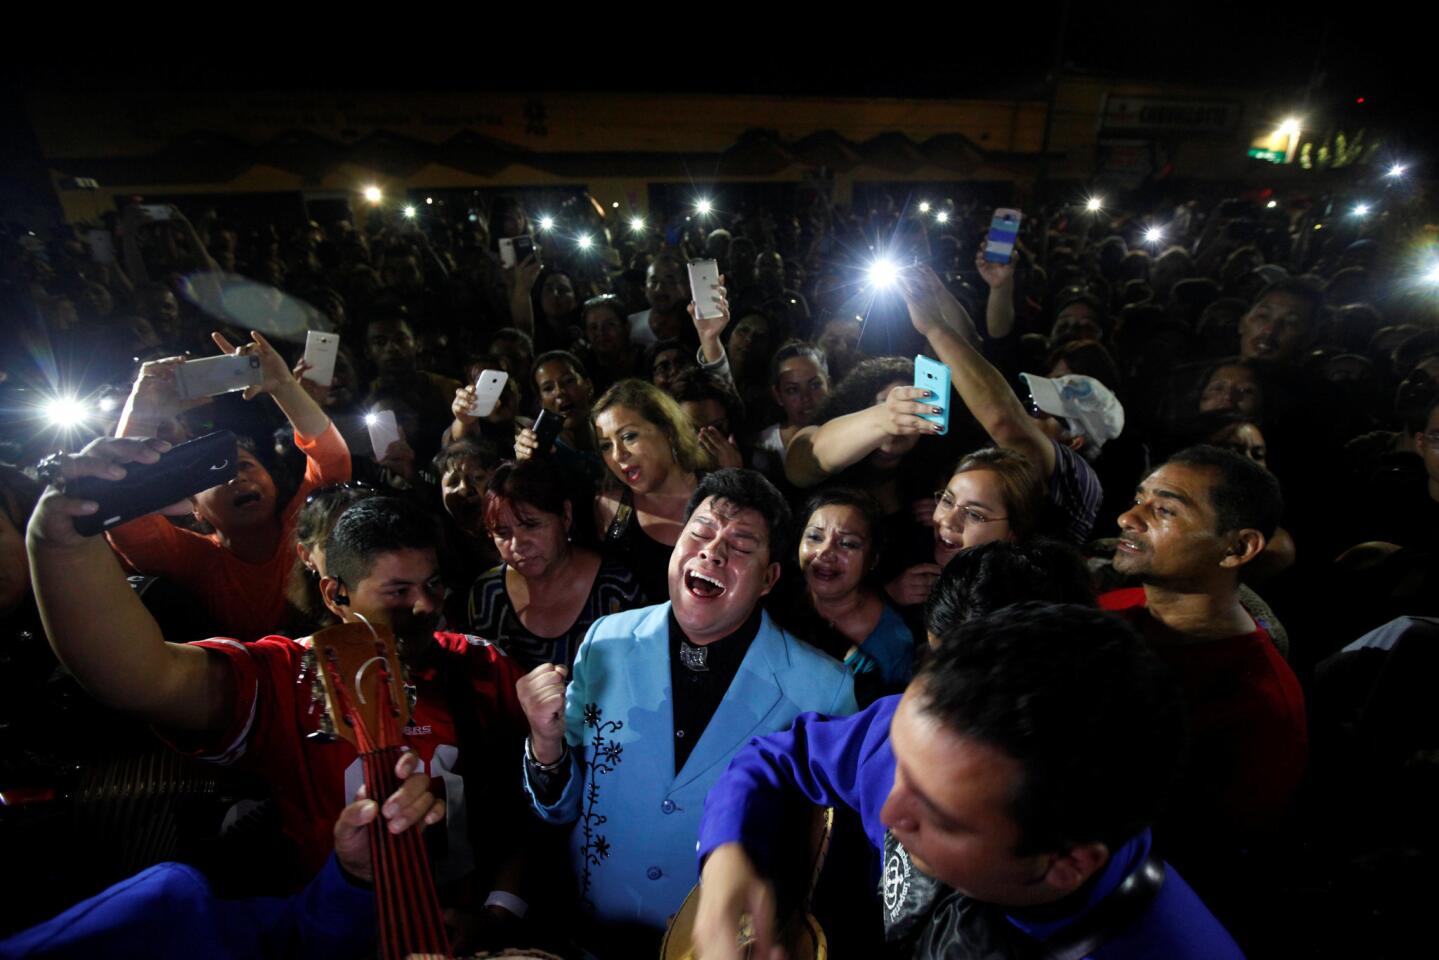 Fans perform songs from iconic Mexican singer and song writer Juan Gabriel outside his house after his death, in Ciudad Juarez, Mexico, August 28, 2016.